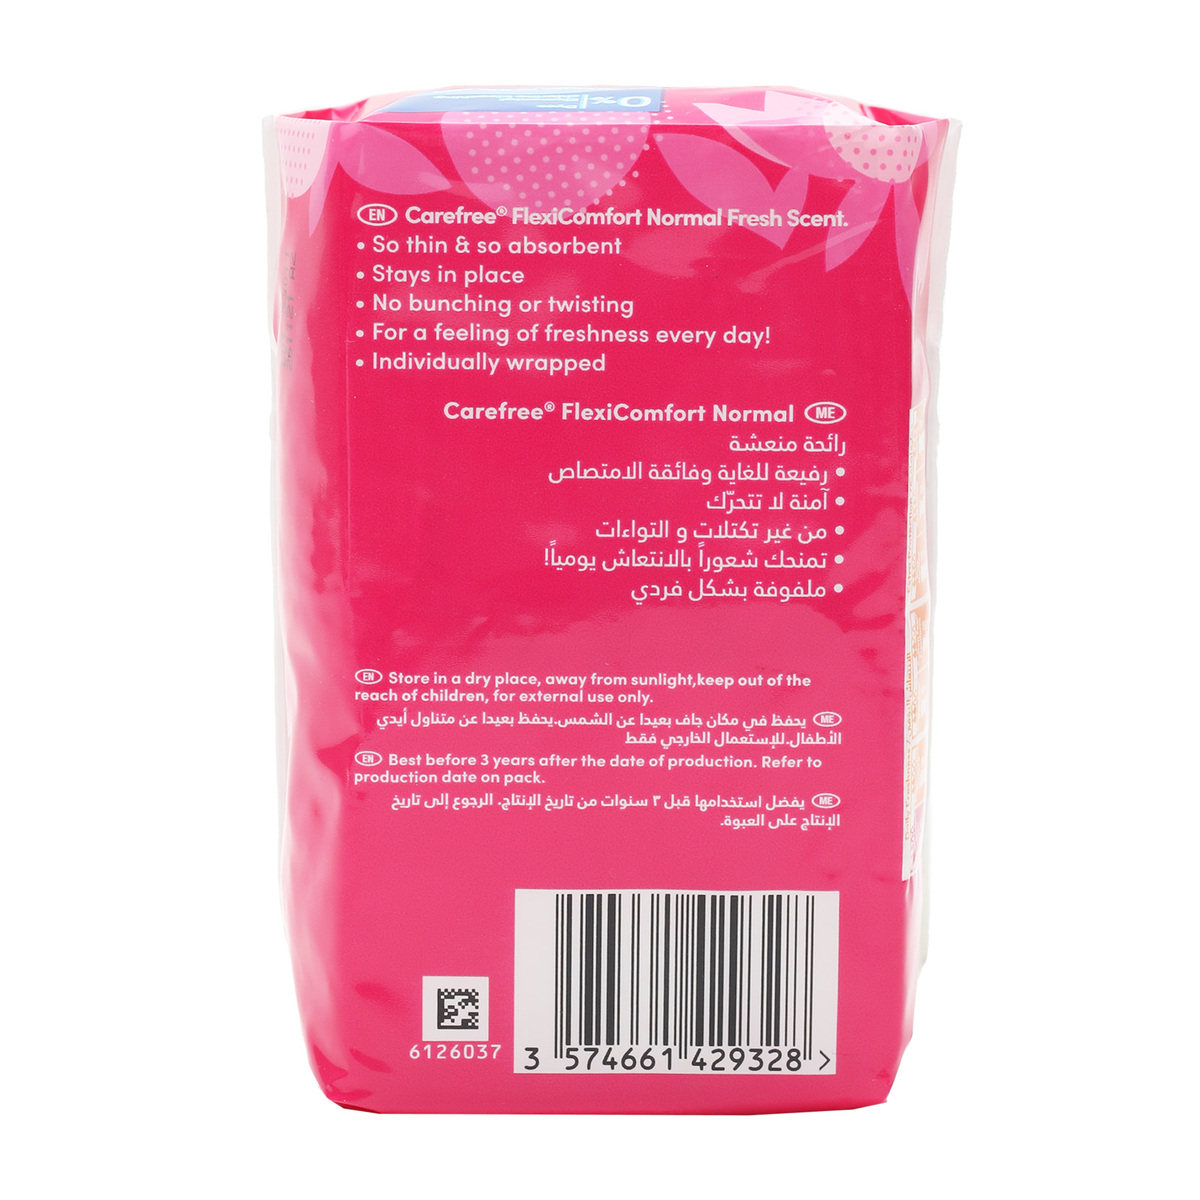 Carefree Panty Liners FlexiComfort Fresh Scent 60pcs